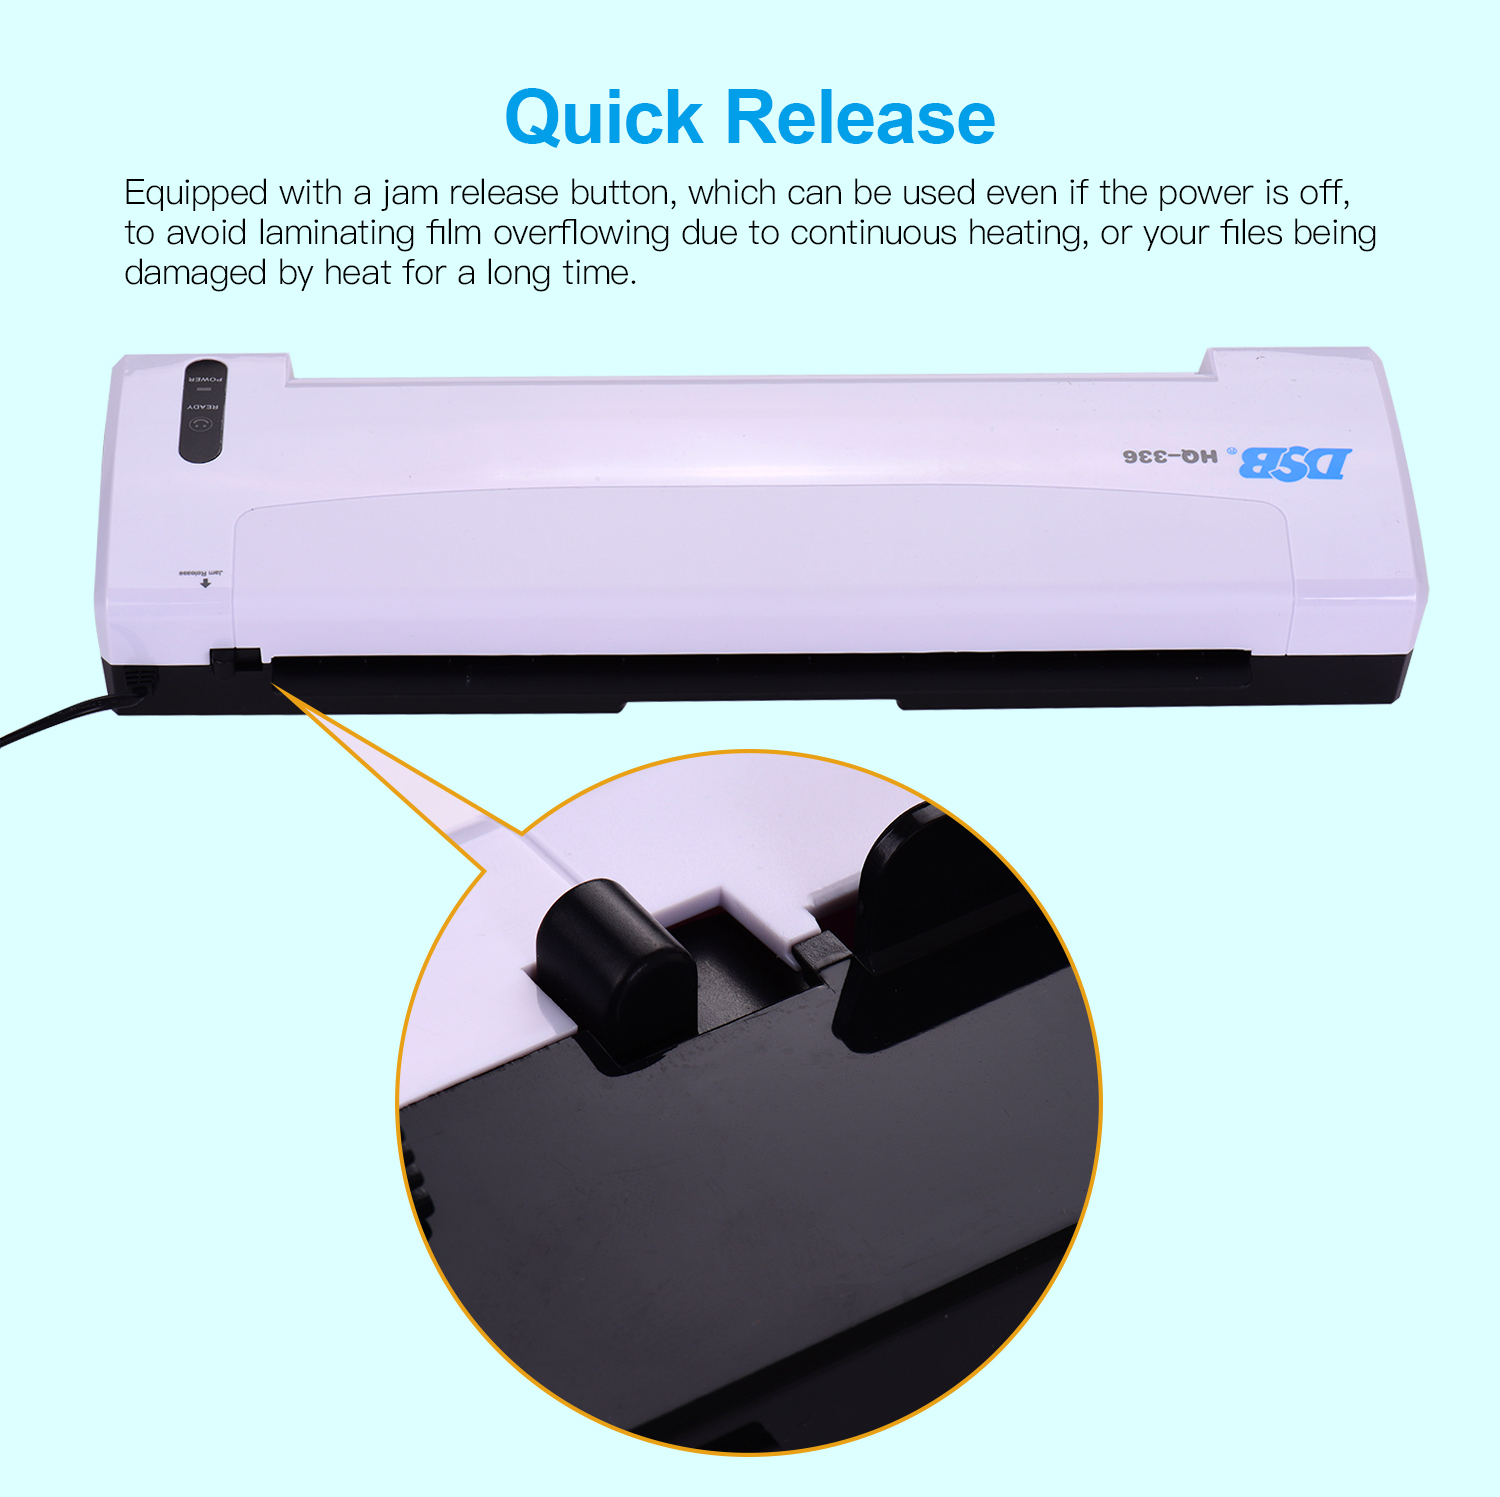 DSB A3 Laminator Photo/Paper Hot Cold Laminating Machine 13 Inch Entry Width 125mic Pouch Thickness with Paper Trimmer Cutter